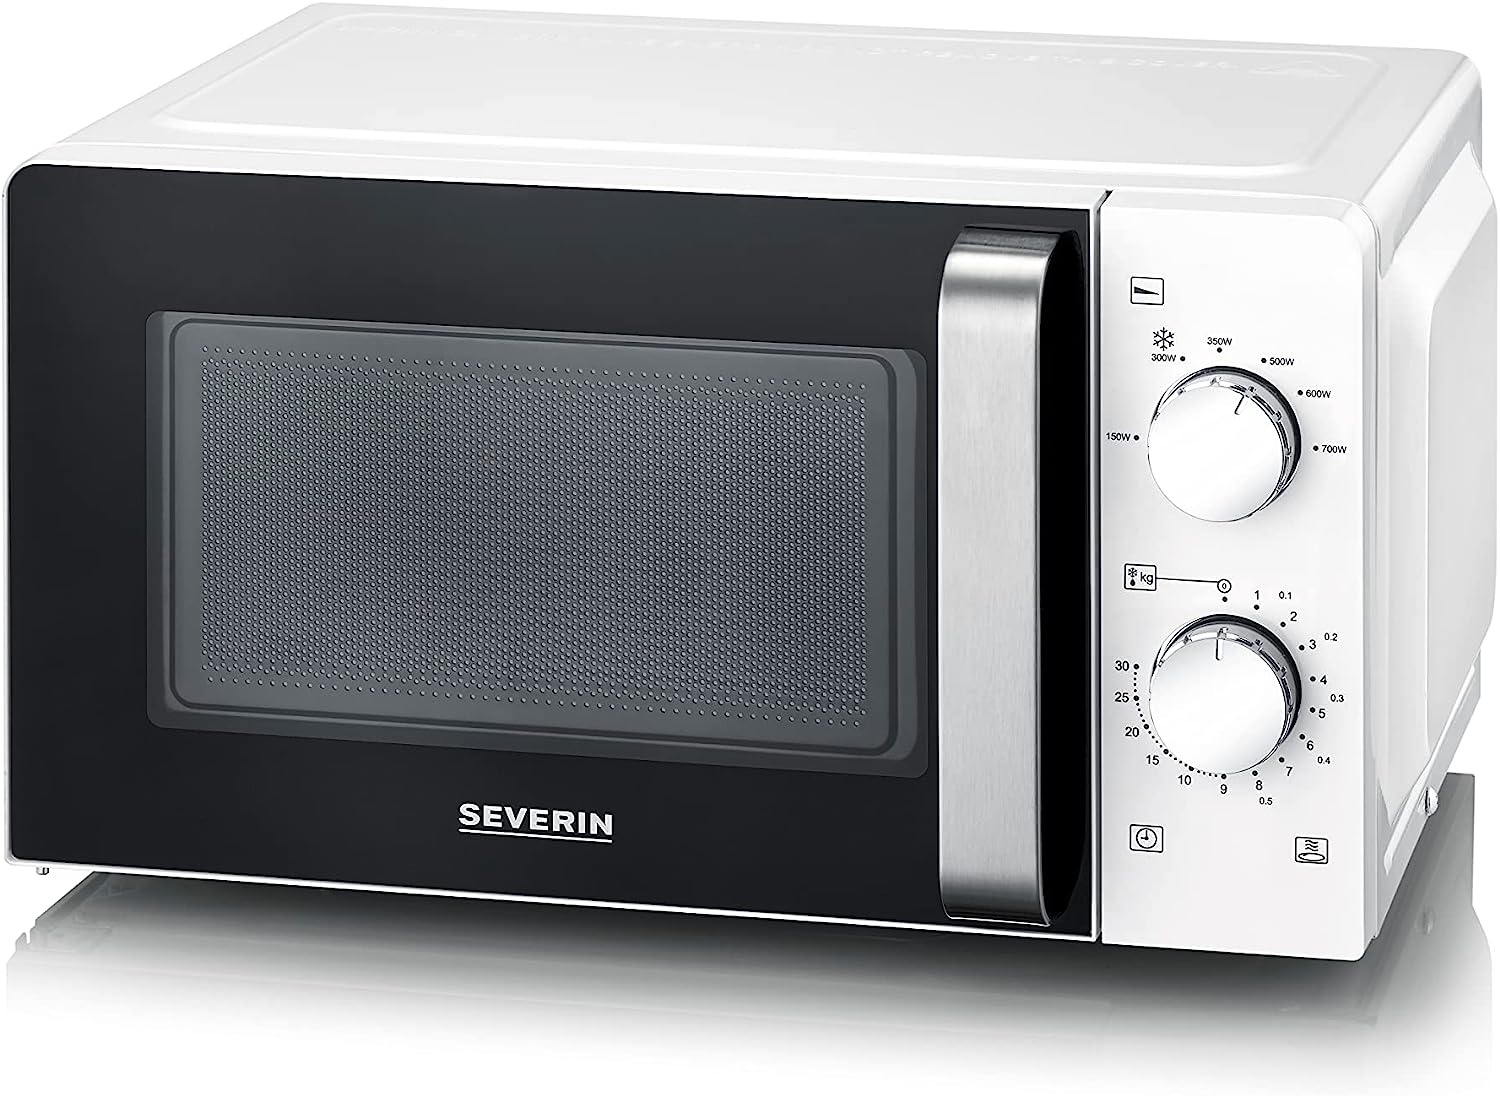 Severin Microwave for Defrosting and Heating, Analogue Microwave with Turntable for Even Heat Distribution, Microwave White MW 7885